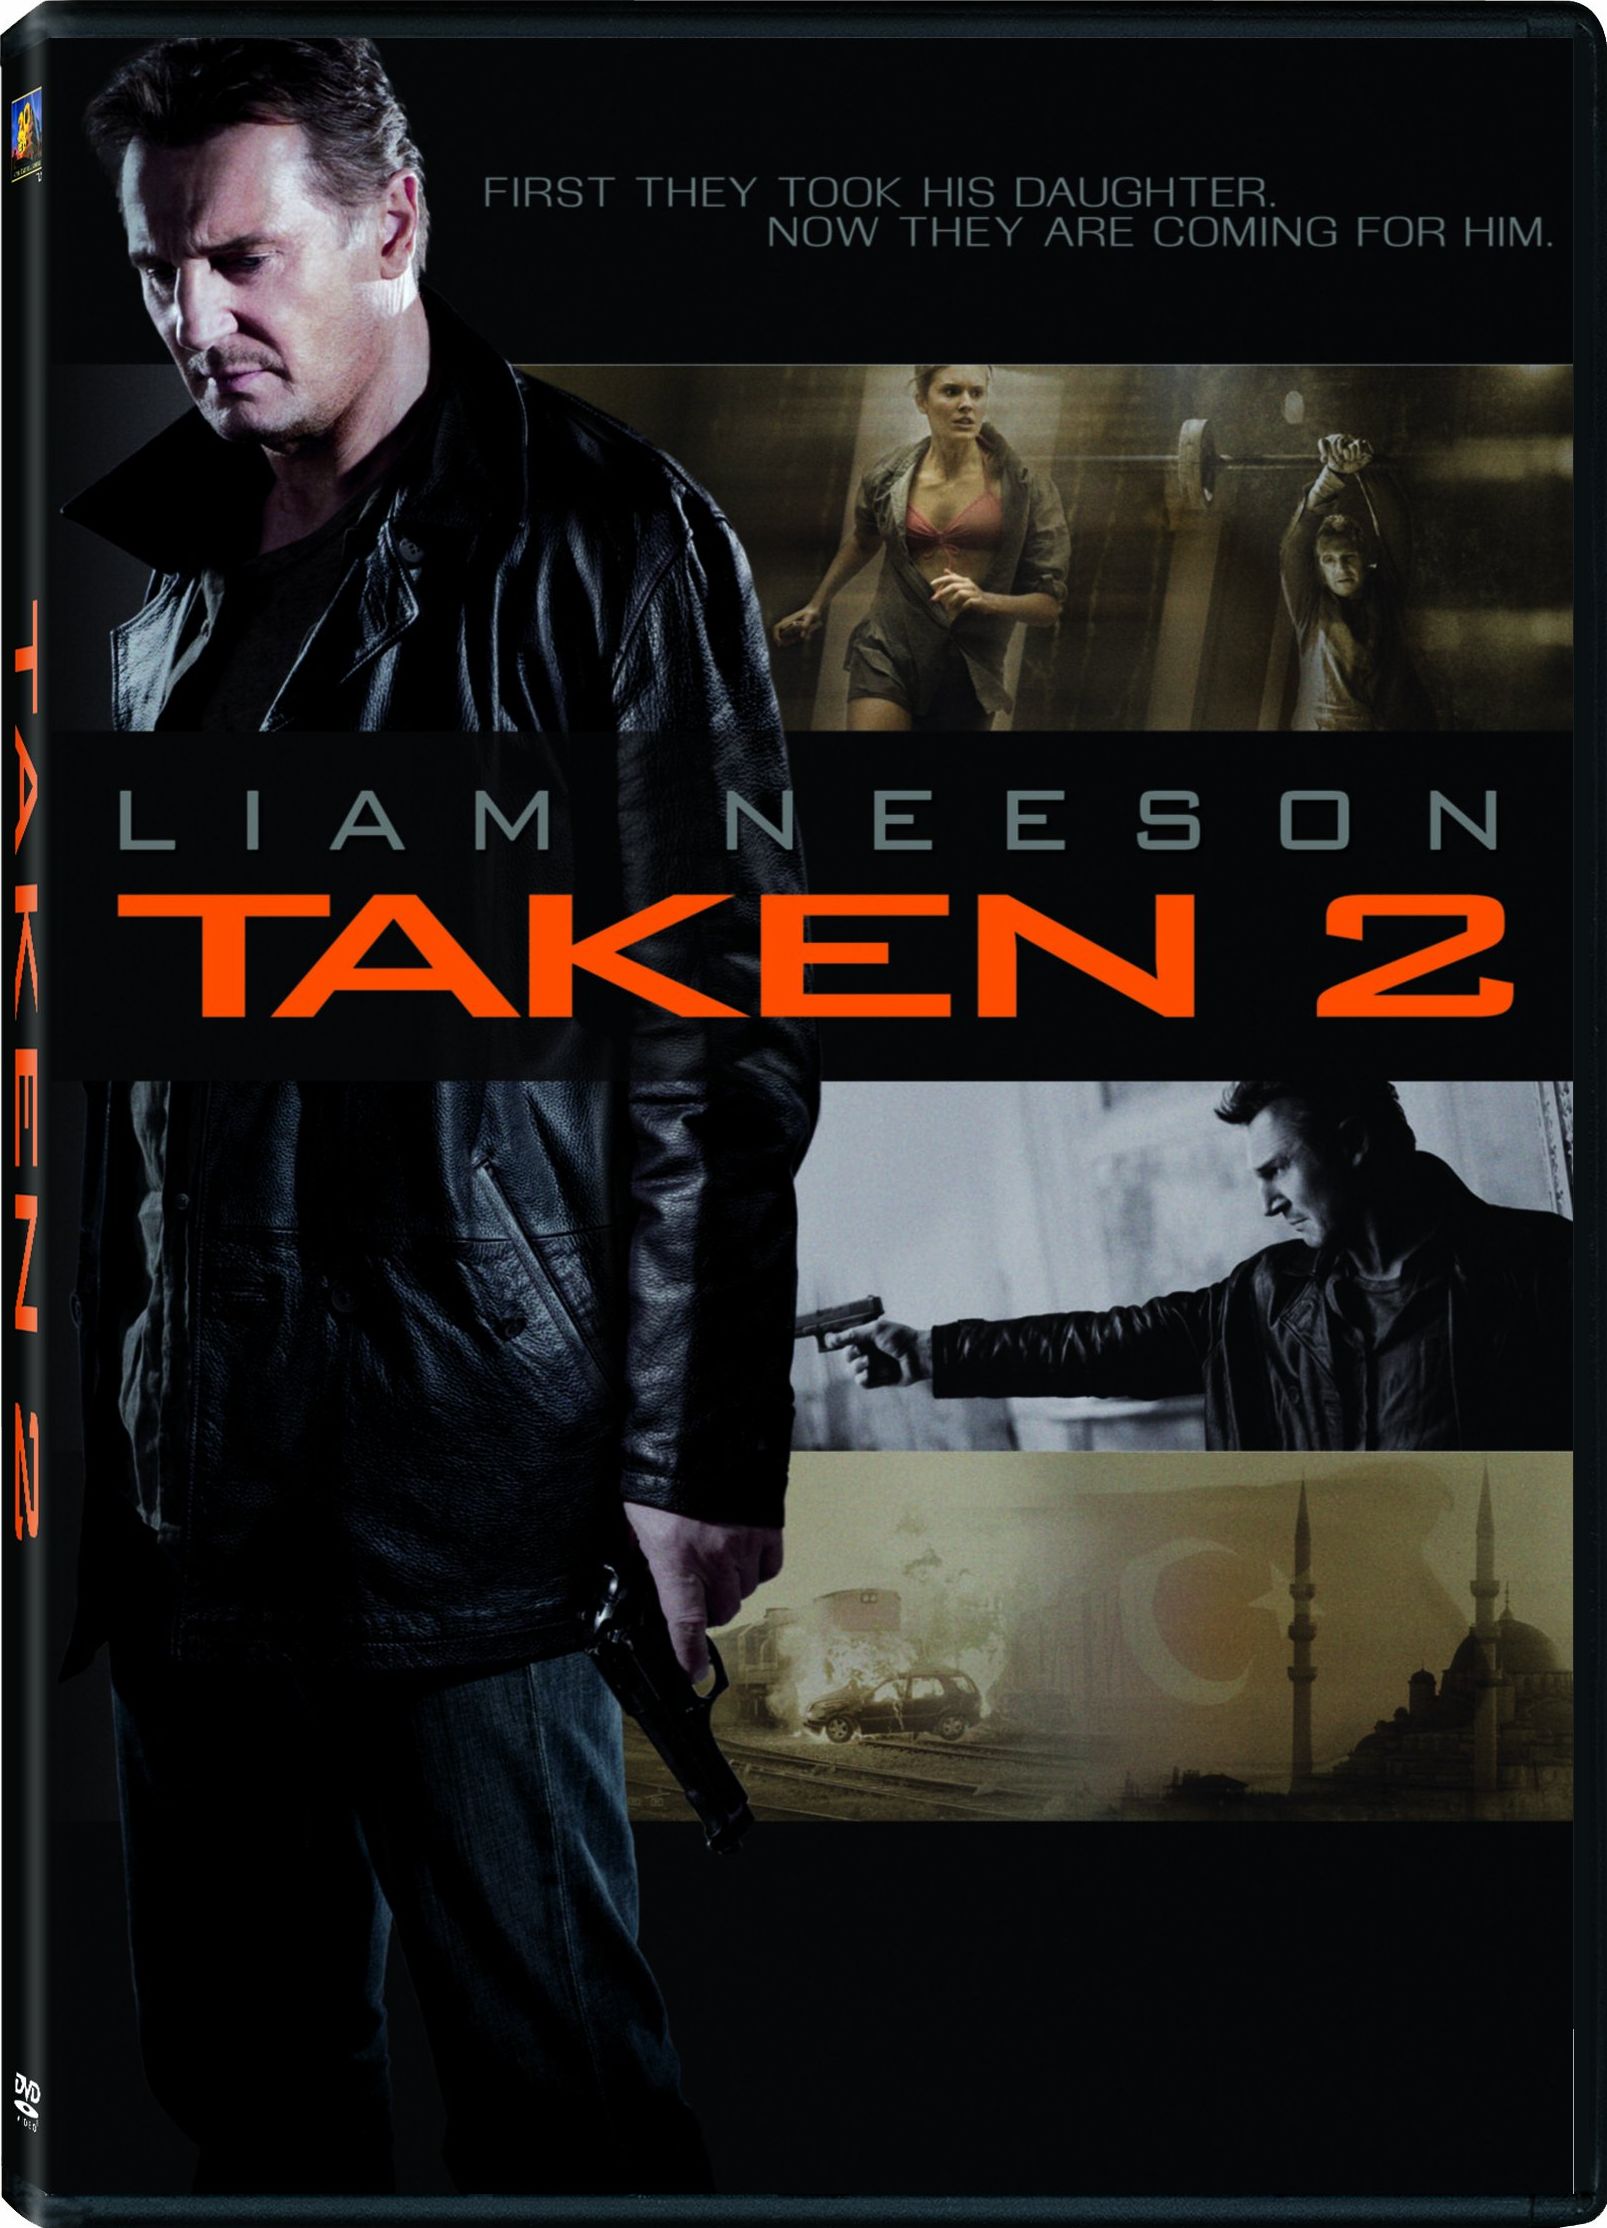 taken 2 movie what country is made